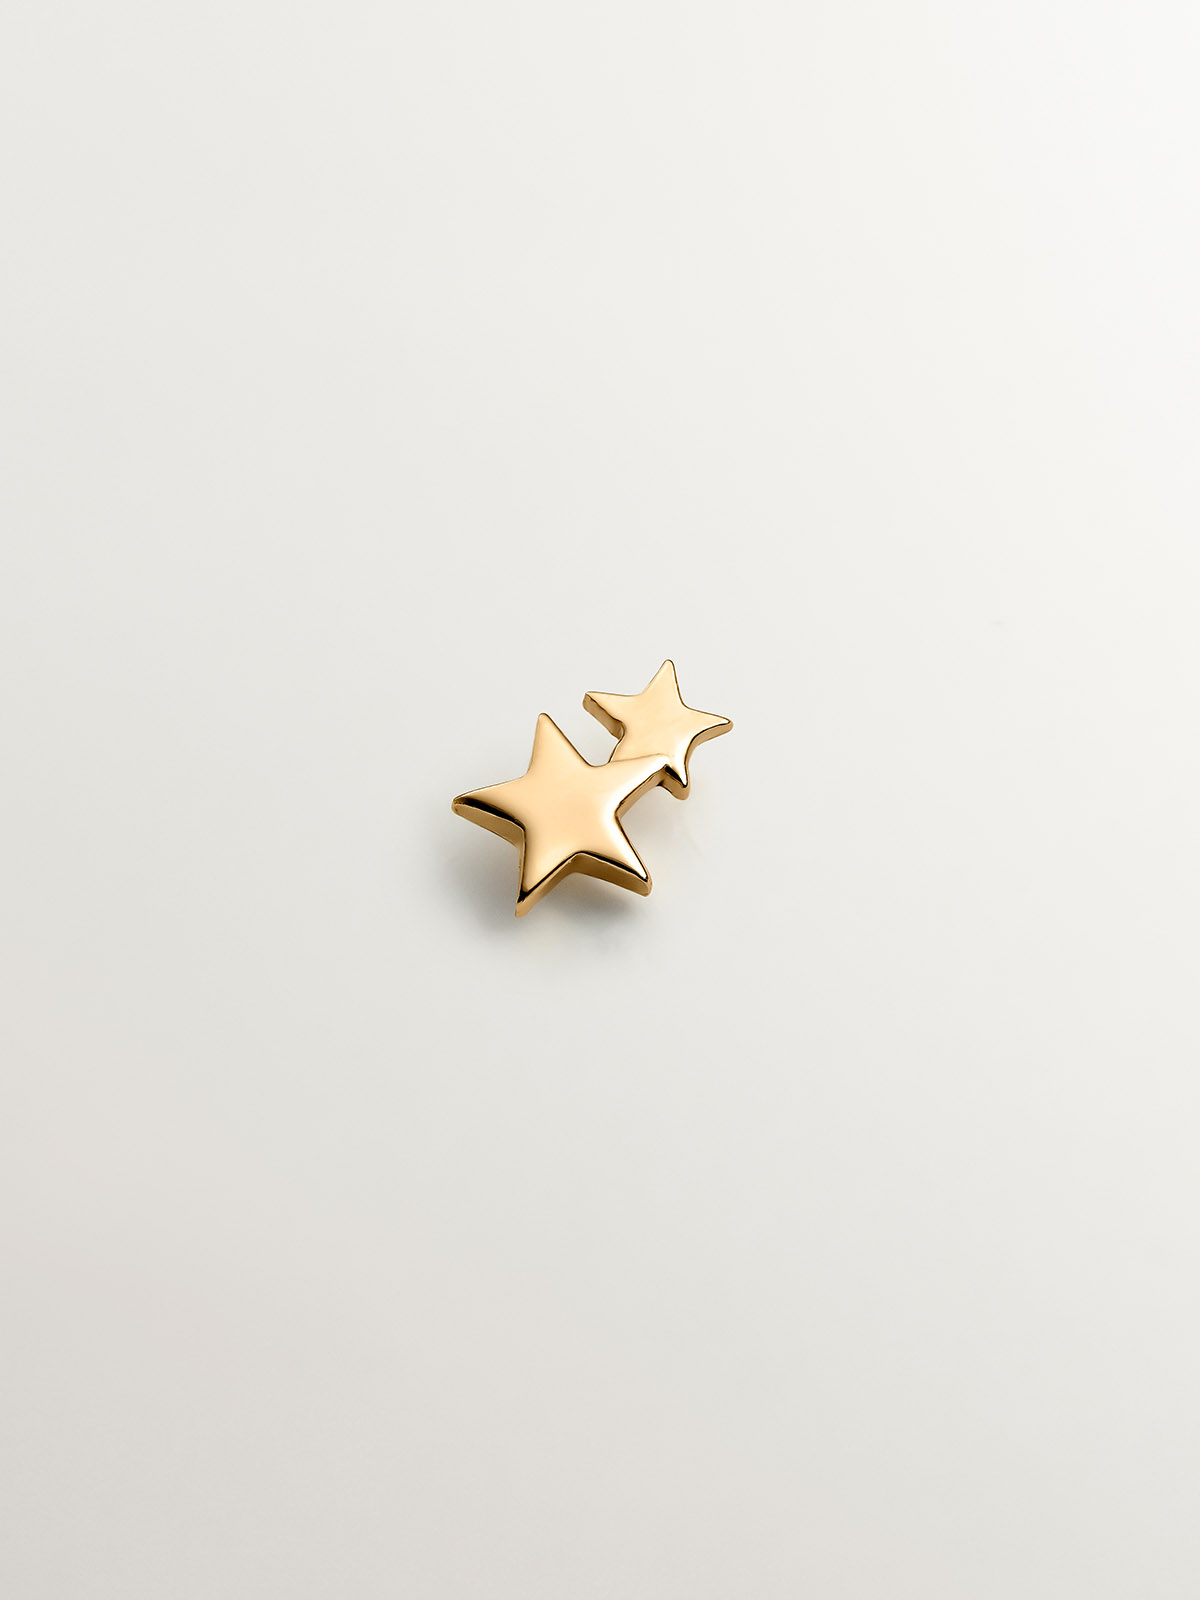 Individual small earring made of 925 silver bathed in 18K yellow gold with stars